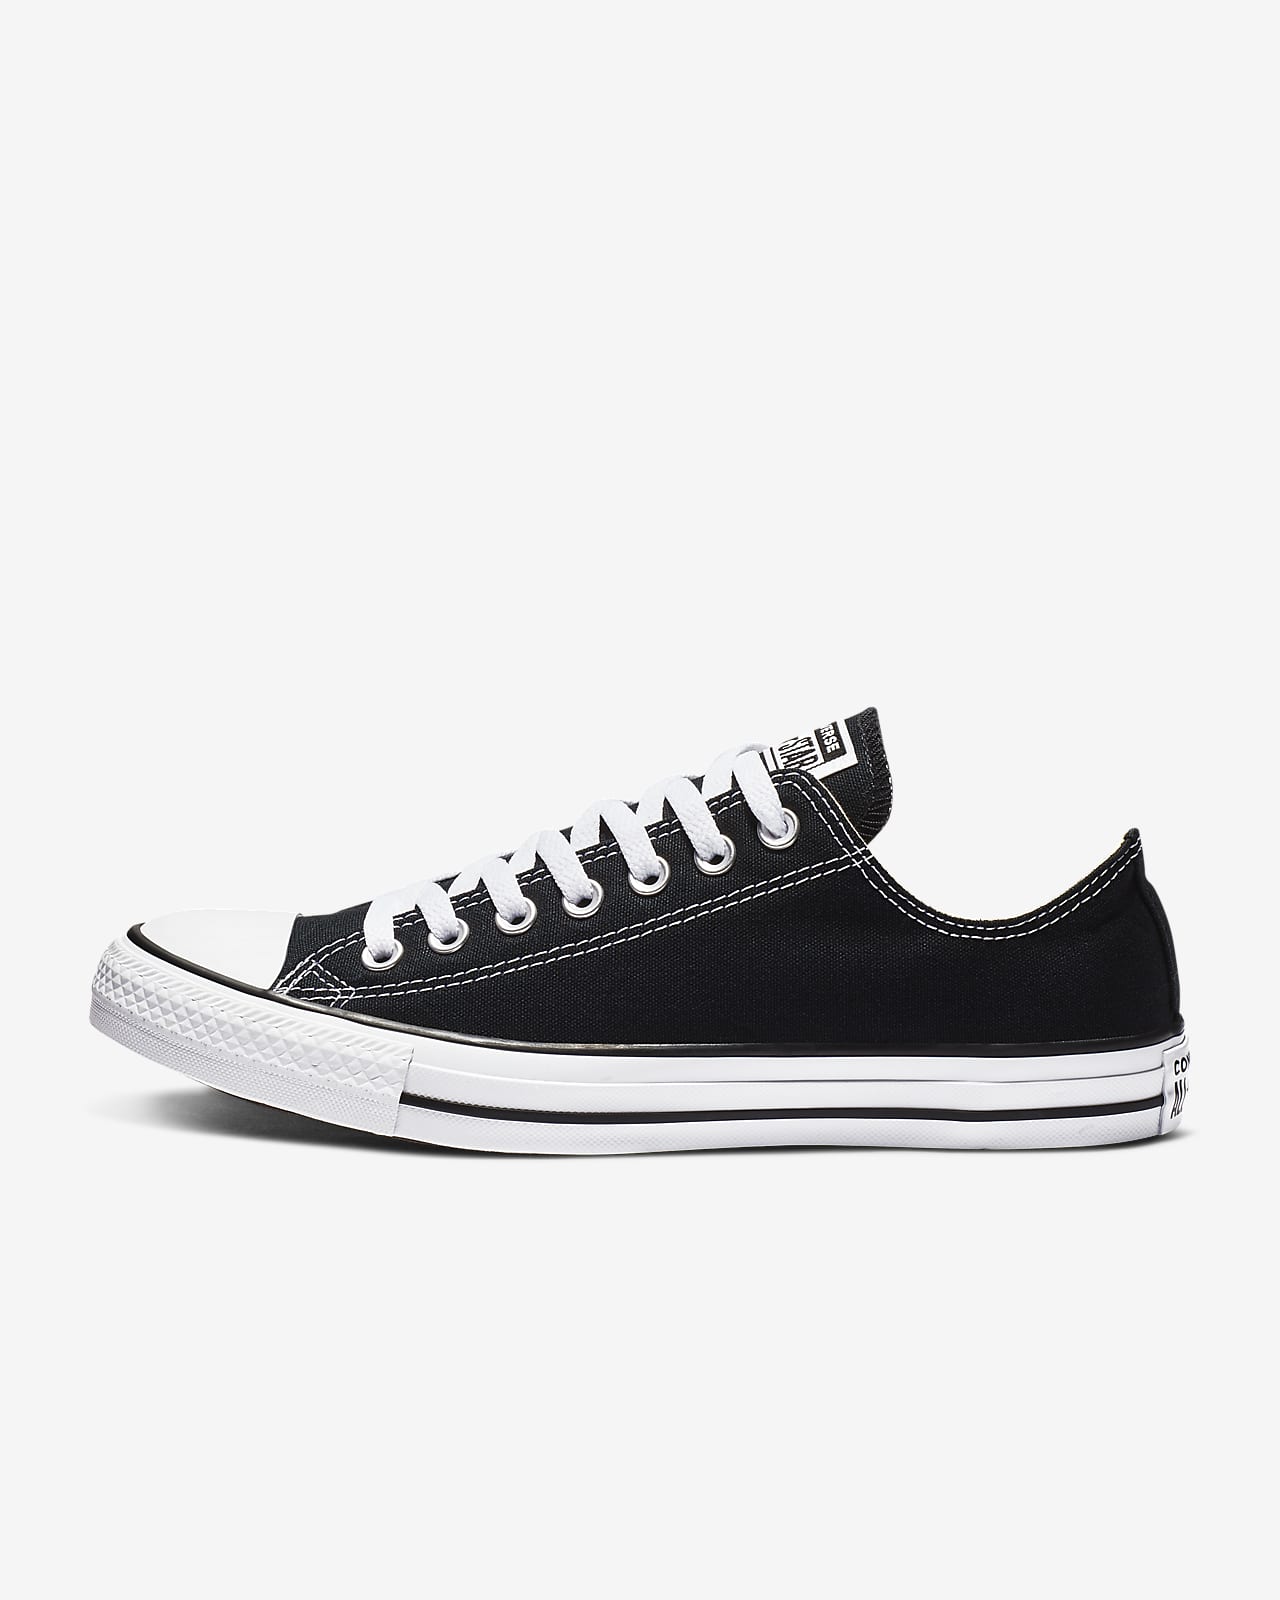 Converse Chuck Taylor All Star Low Top Shoes ماغنسيوم